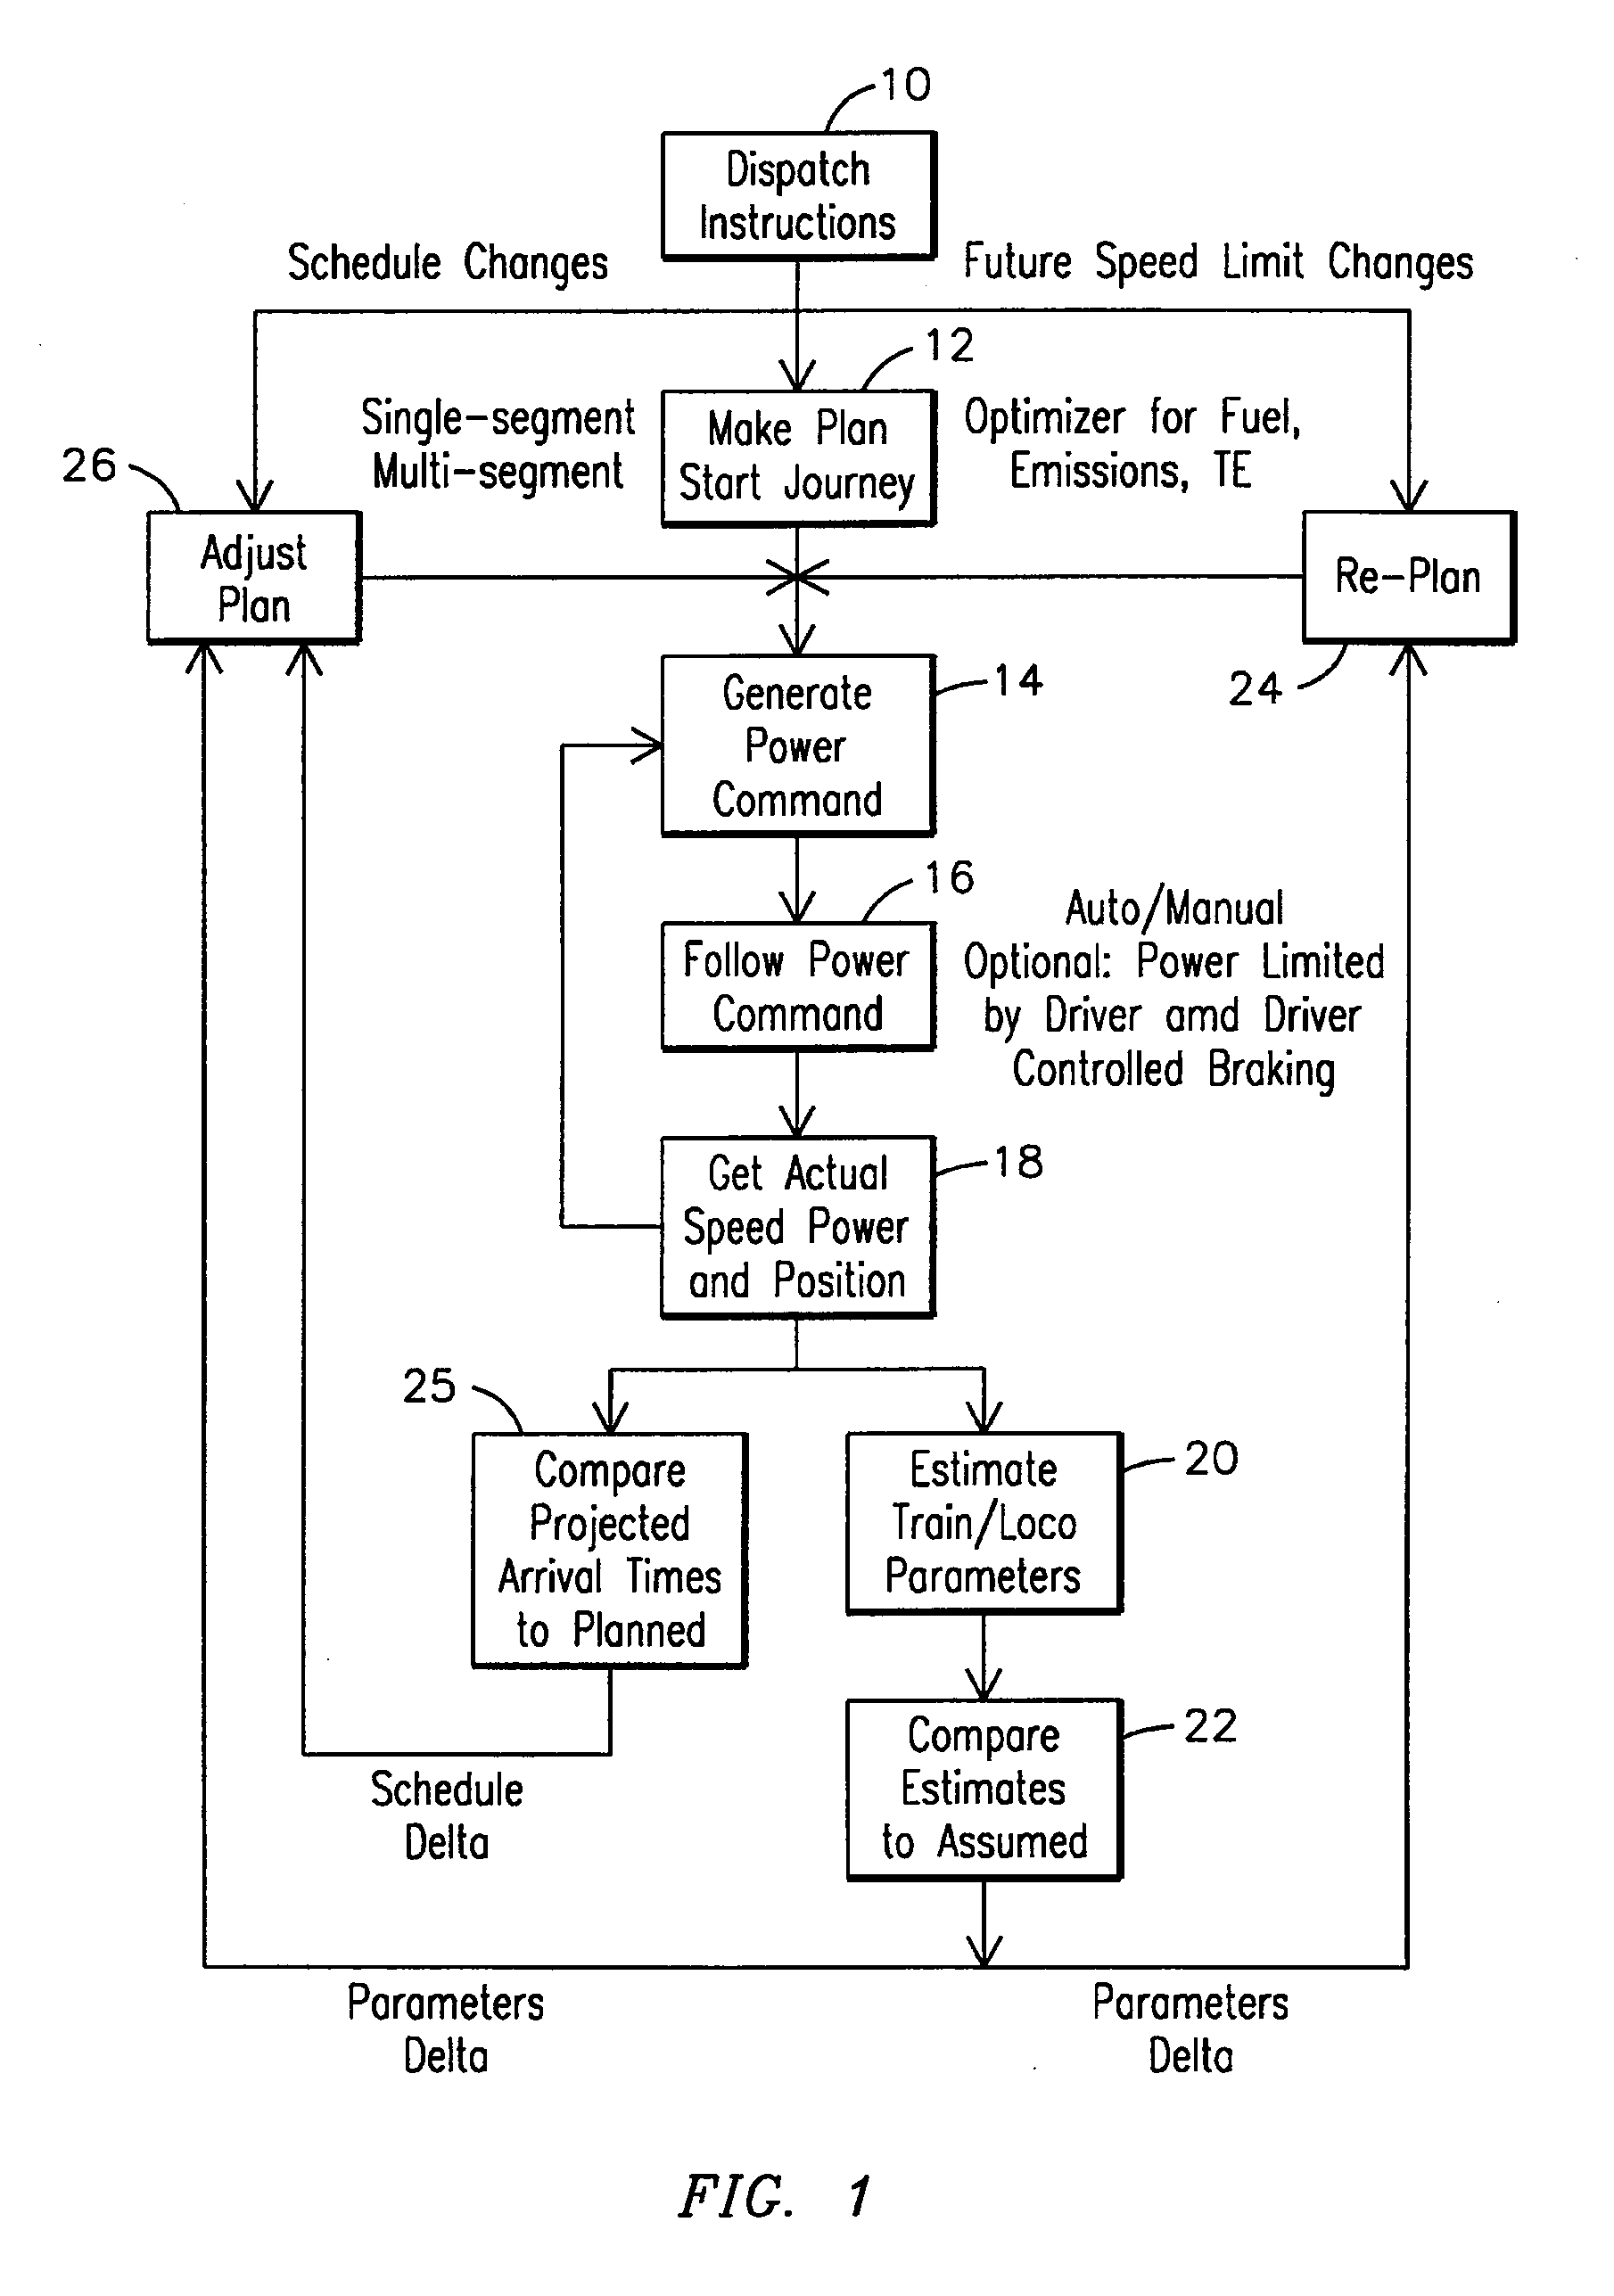 System, method, and computer software code for optimized fuel efficiency emission output, and mission performance of a diesel powered system